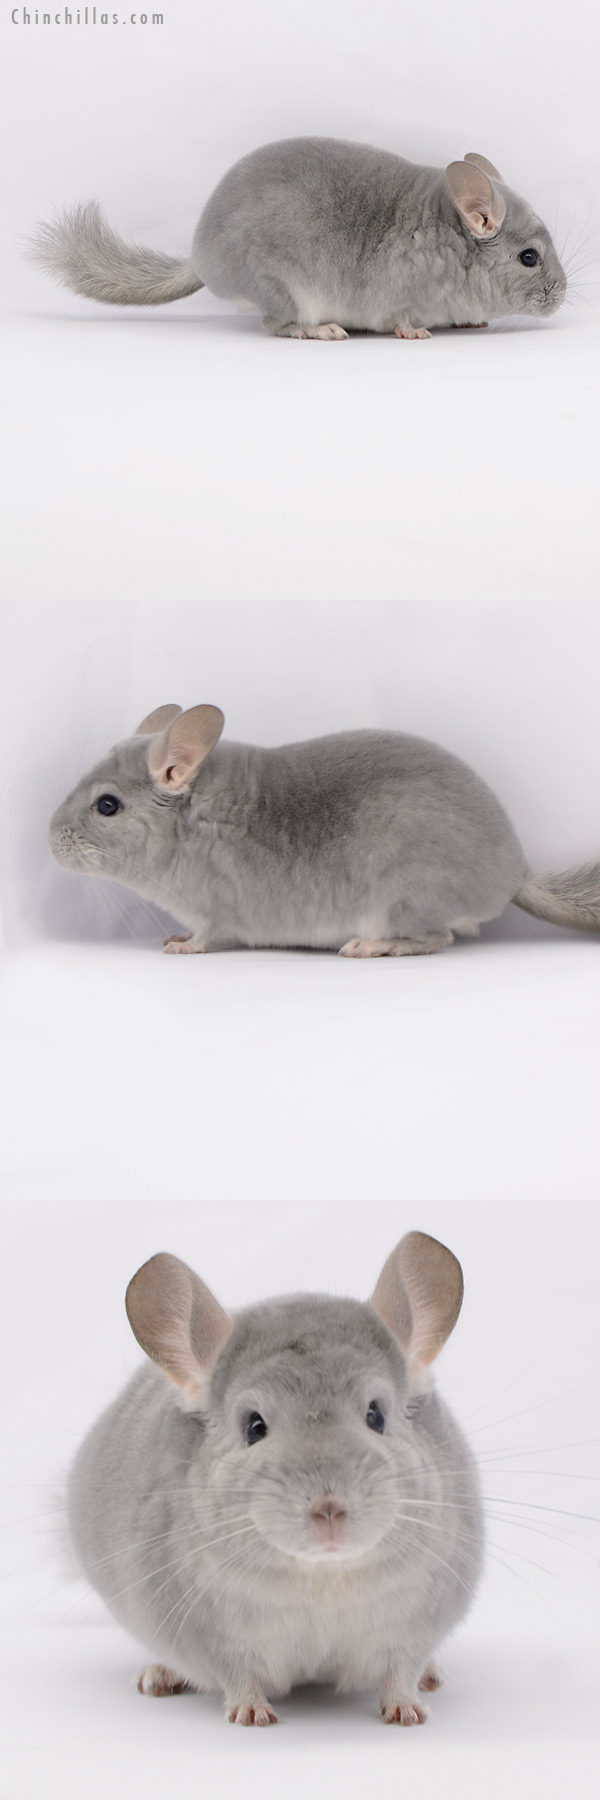 Chinchilla or related item offered for sale or export on Chinchillas.com - 20179 Top Show Quality Blue Diamond Male Chinchilla